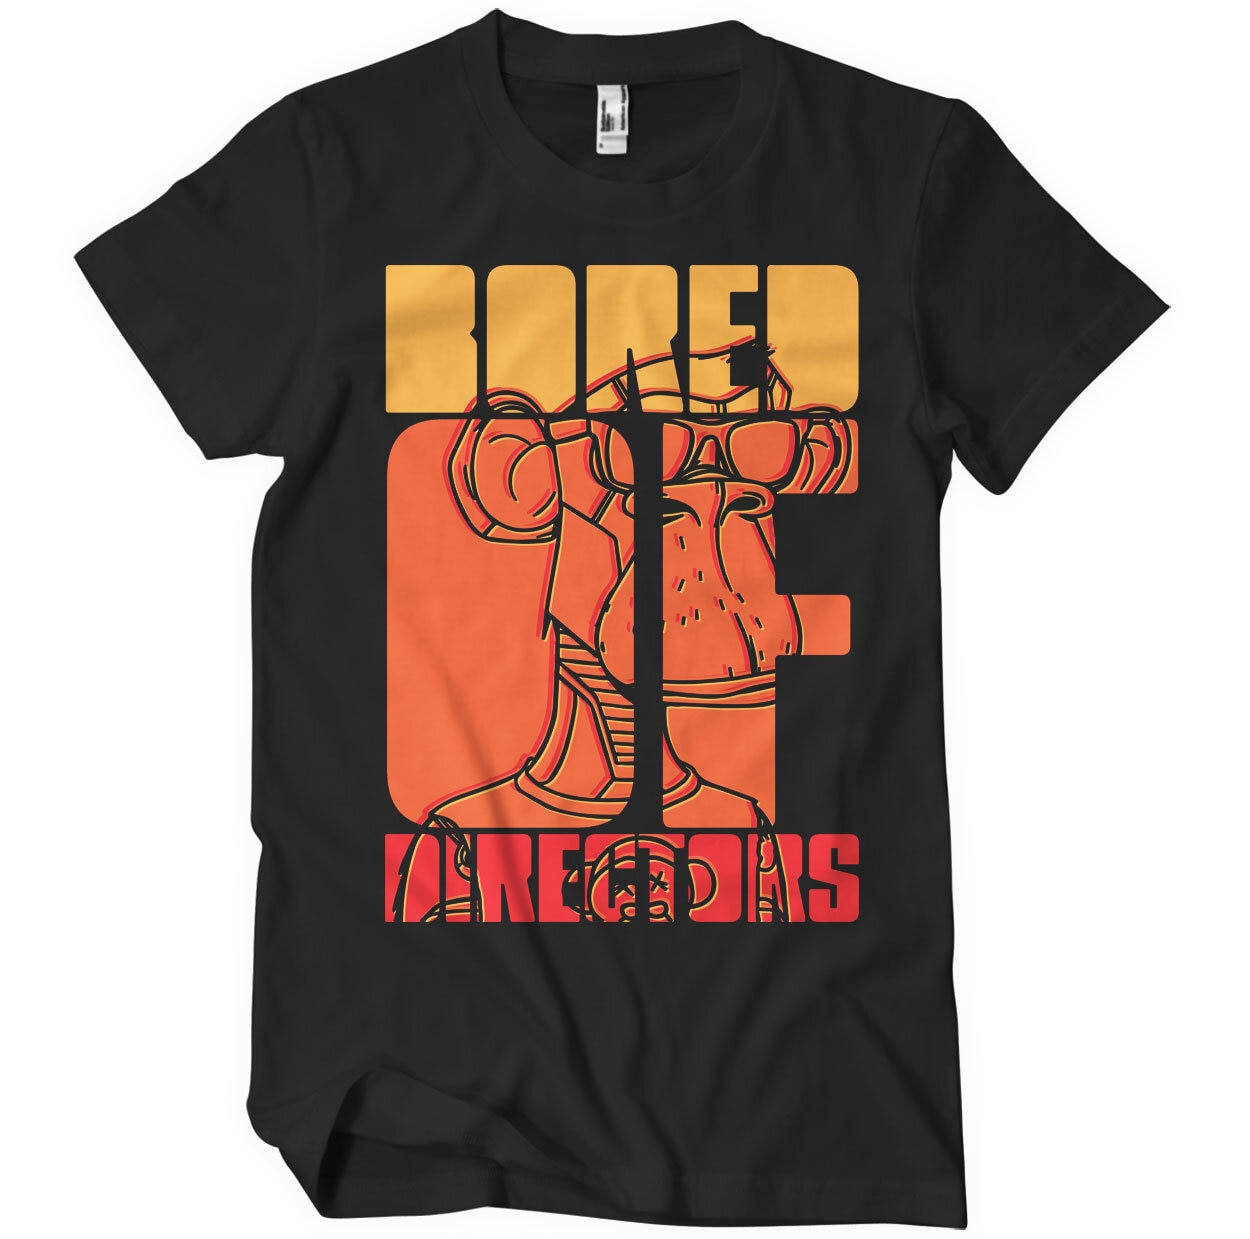 Bored Of Directors Stacked T-Shirt